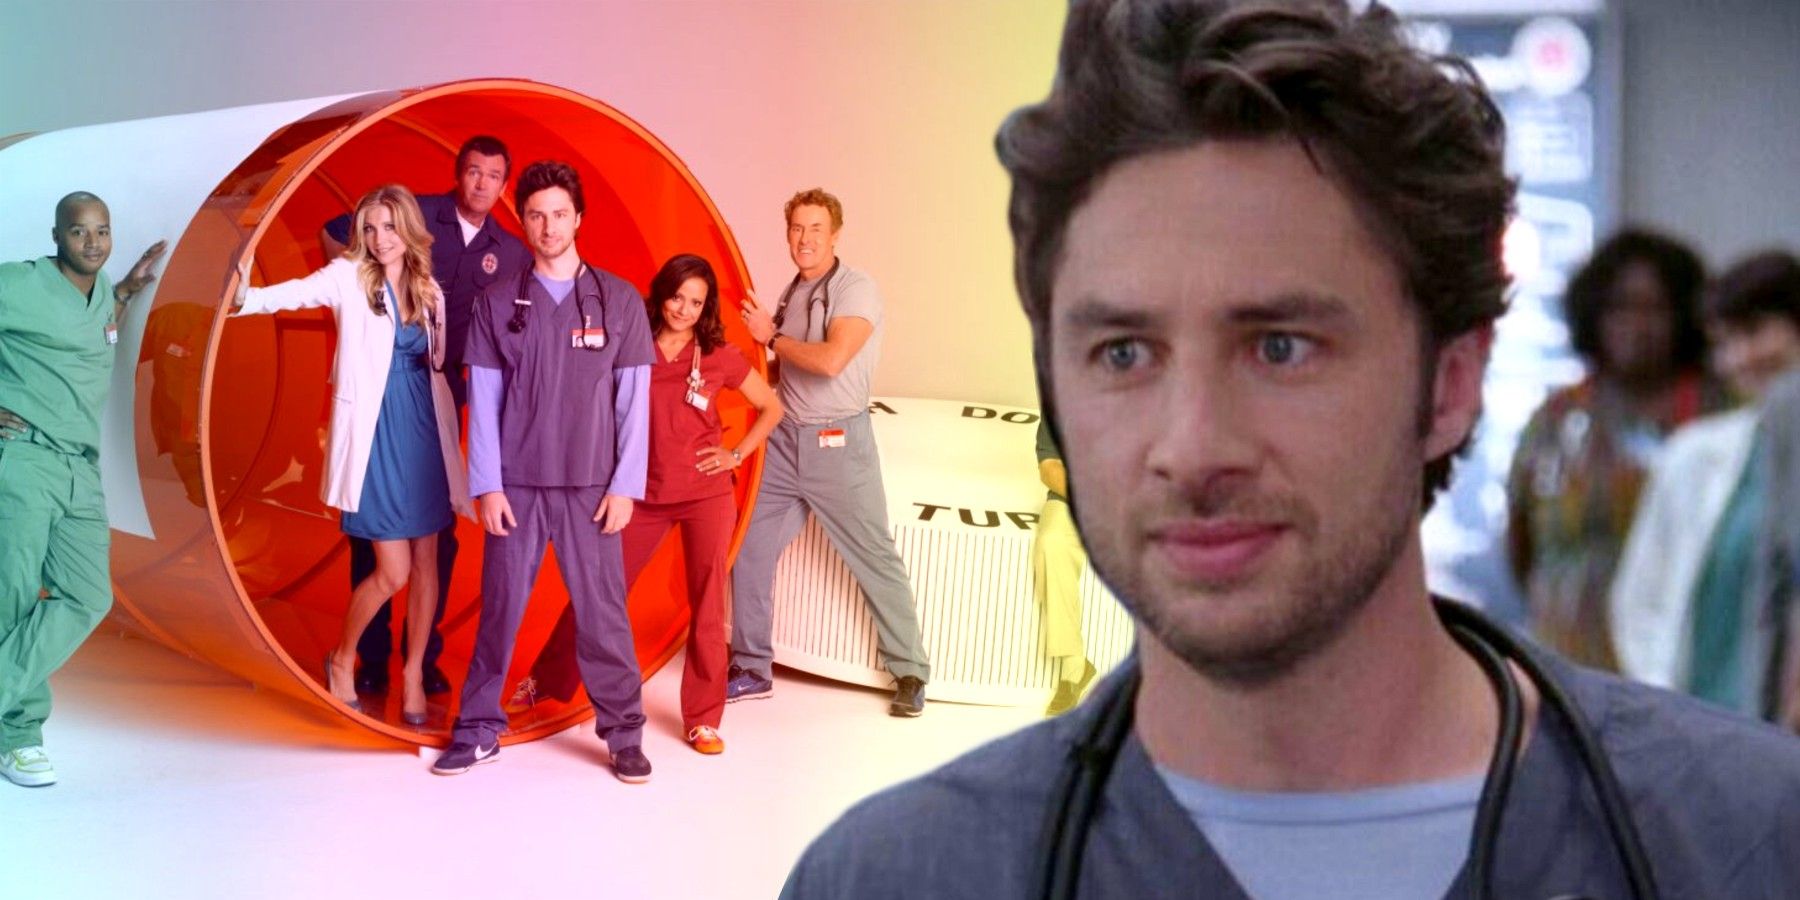 The Scrubs Cast 20 years later. Been scrubbed